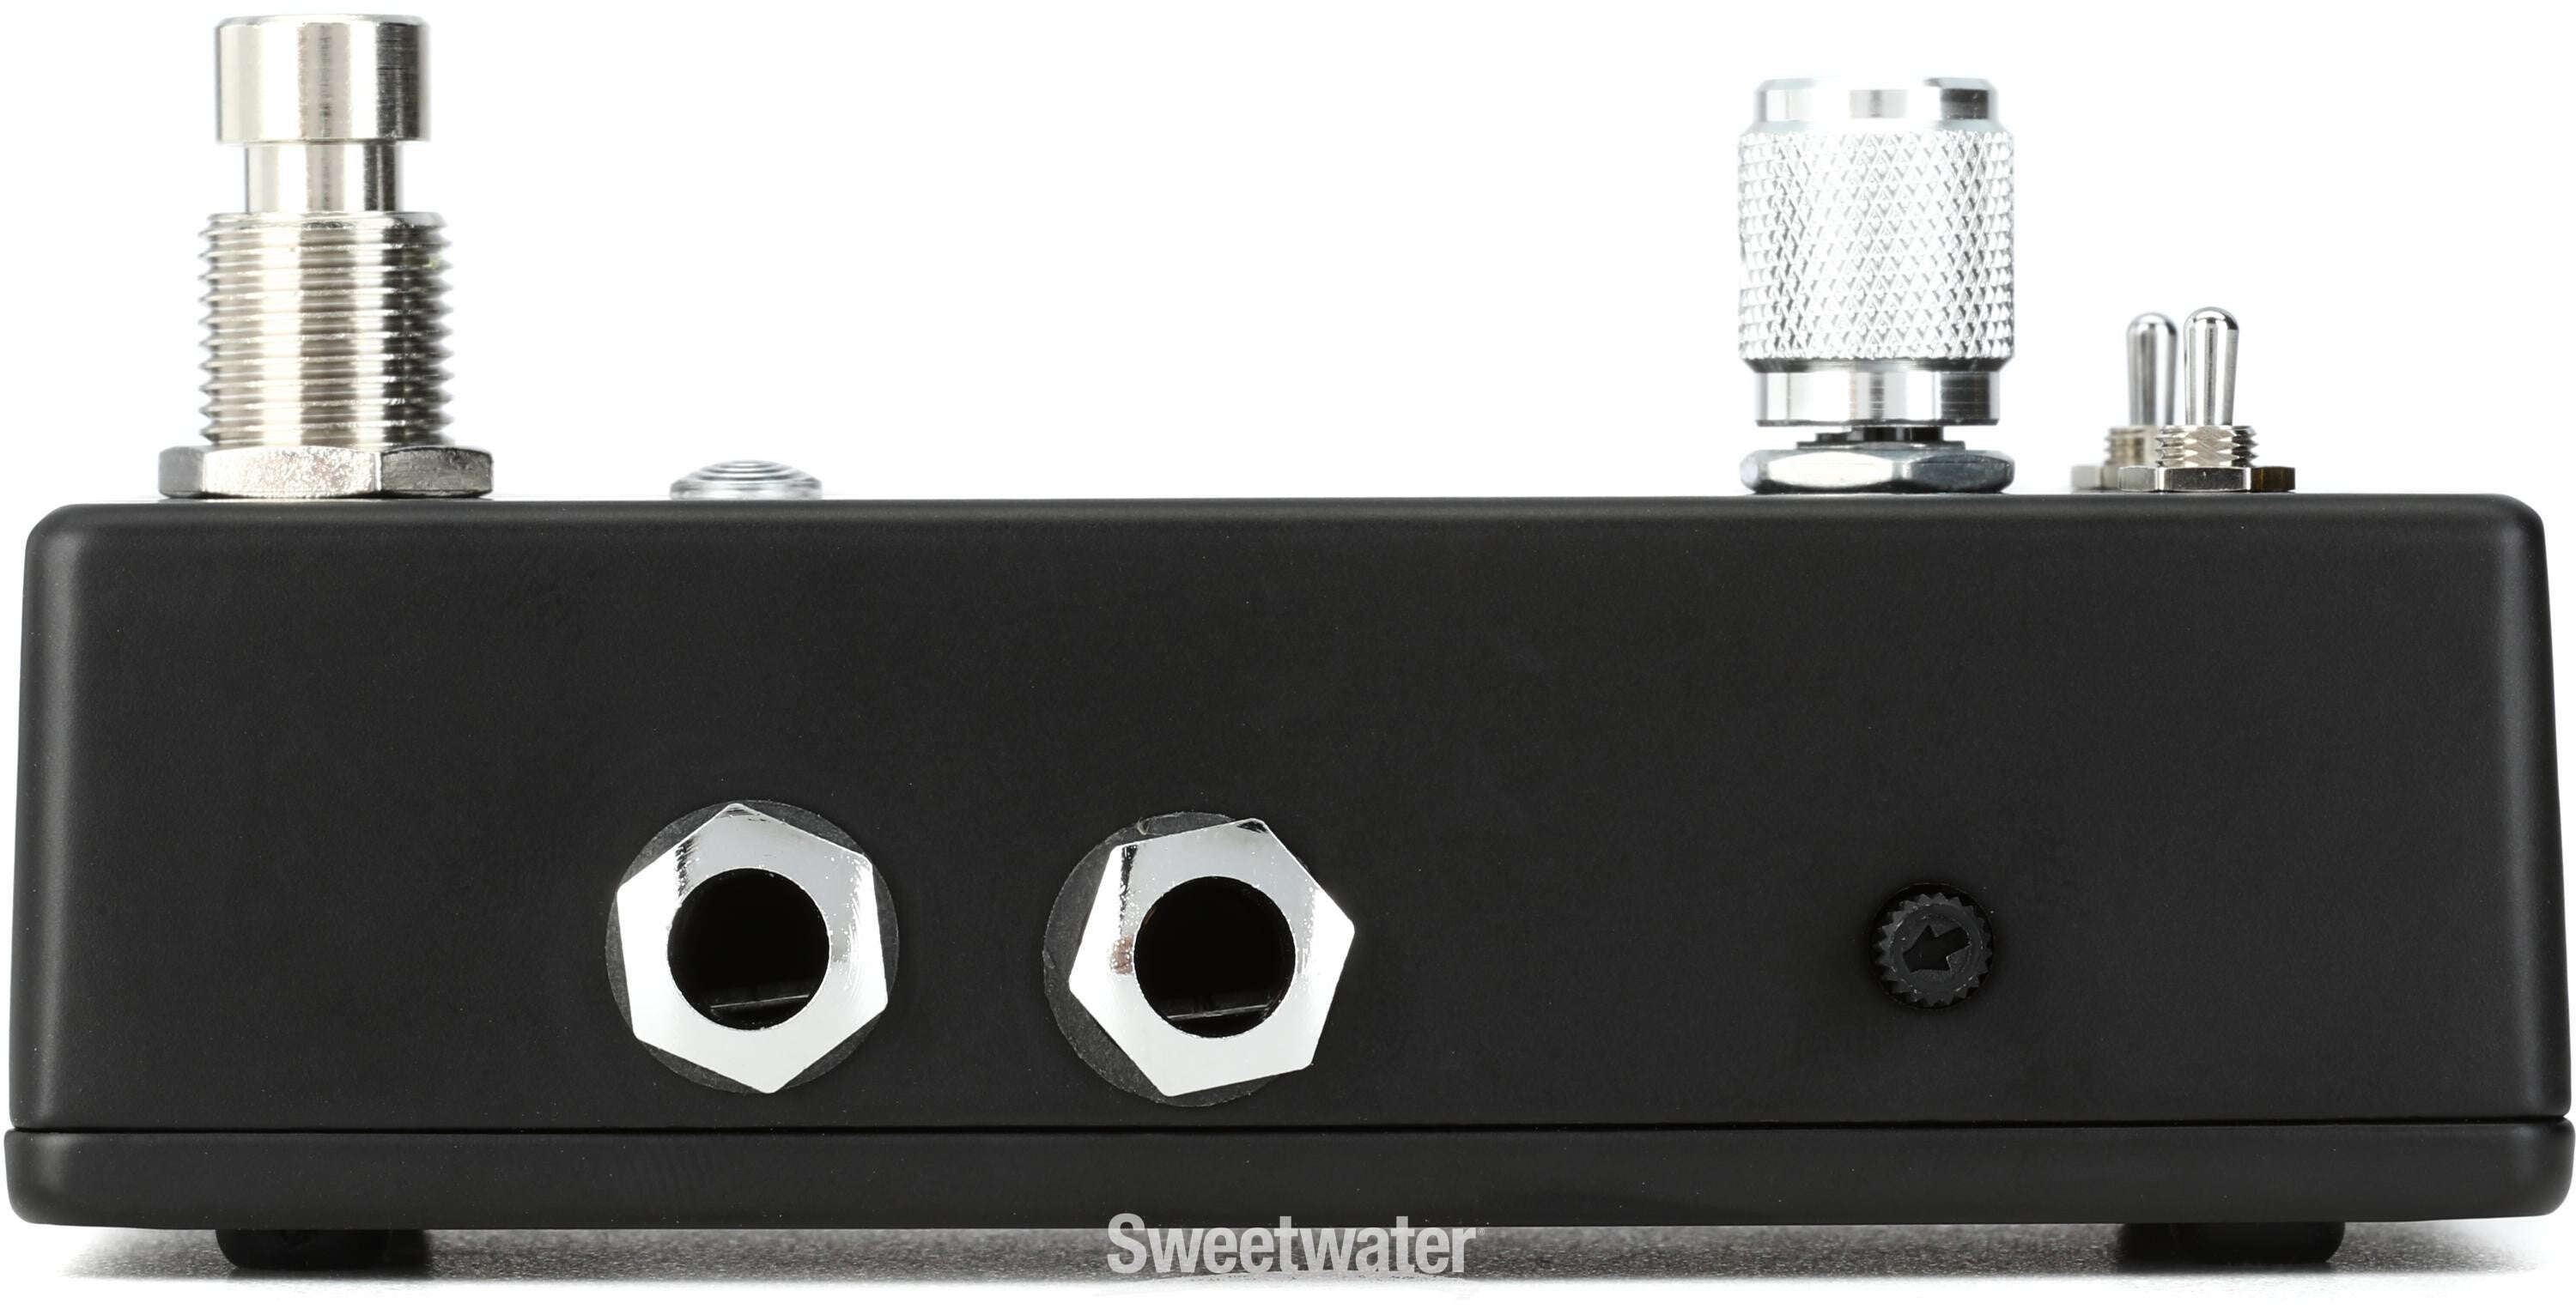 Empress Effects Buffer+ I/O Interface Pedal | Sweetwater